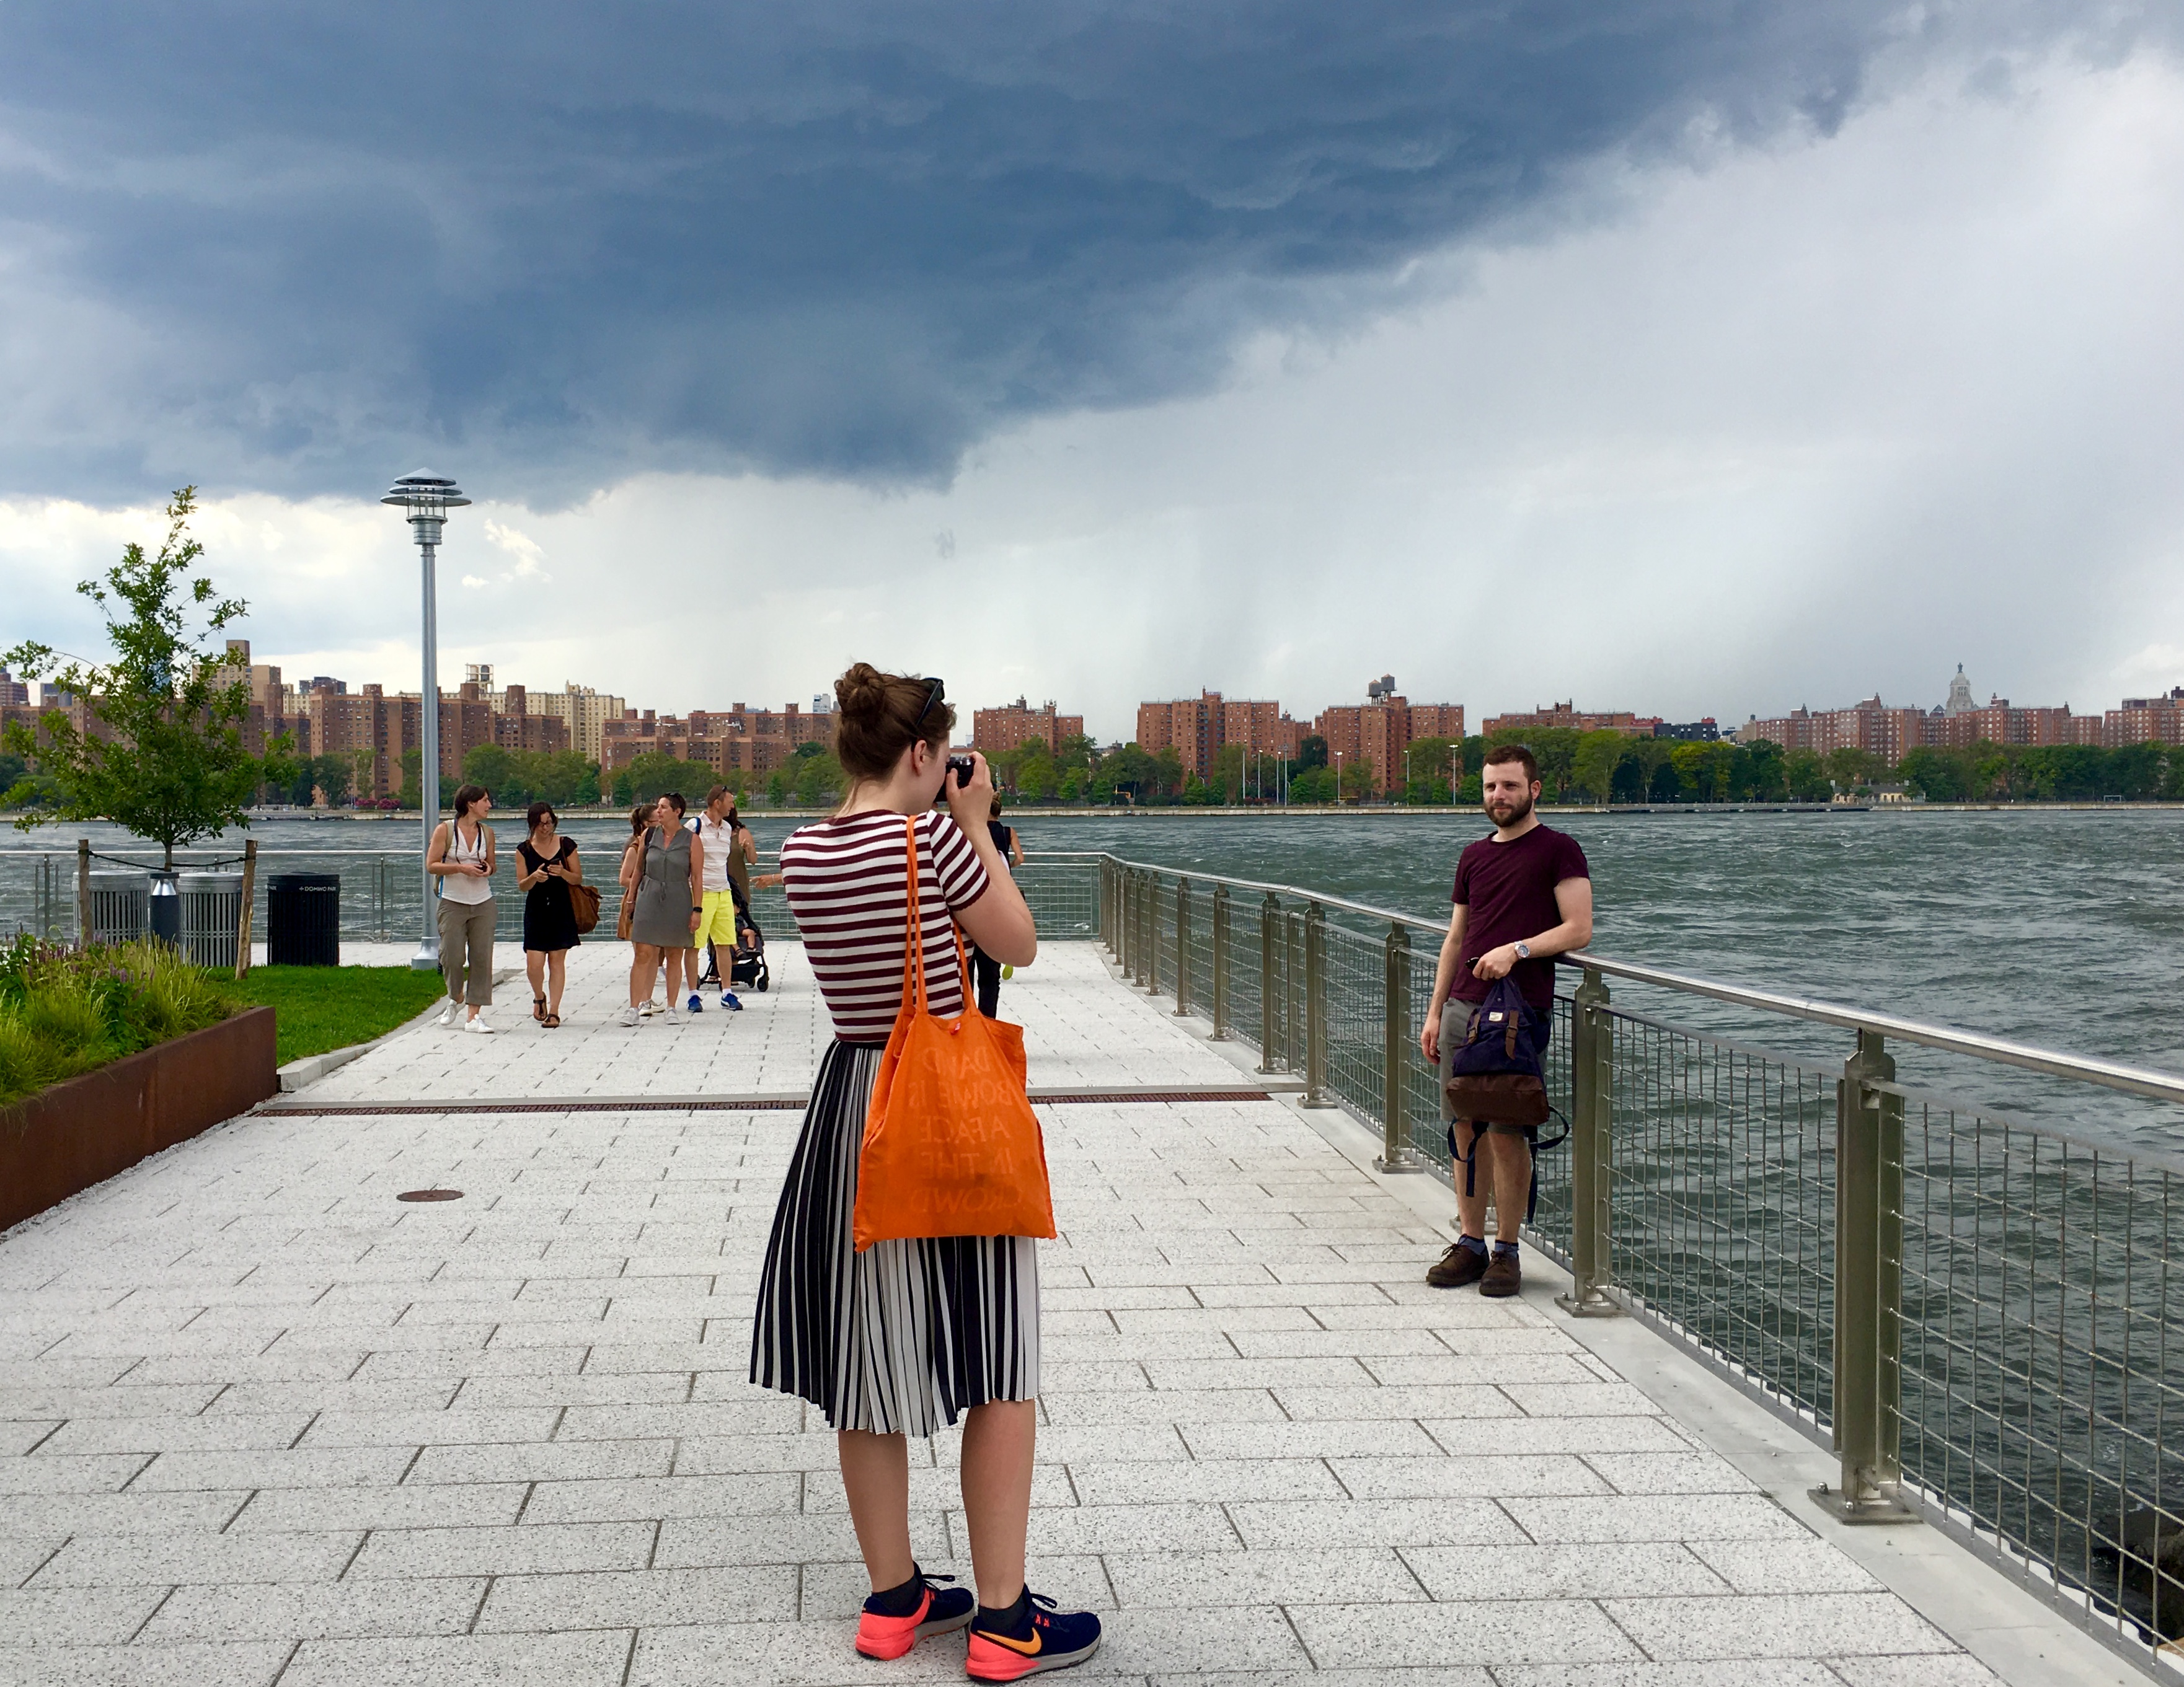 People pose for pictures on Domino Park’s esplanade while a dark cloud looms. Eagle photo by Lore Croghan